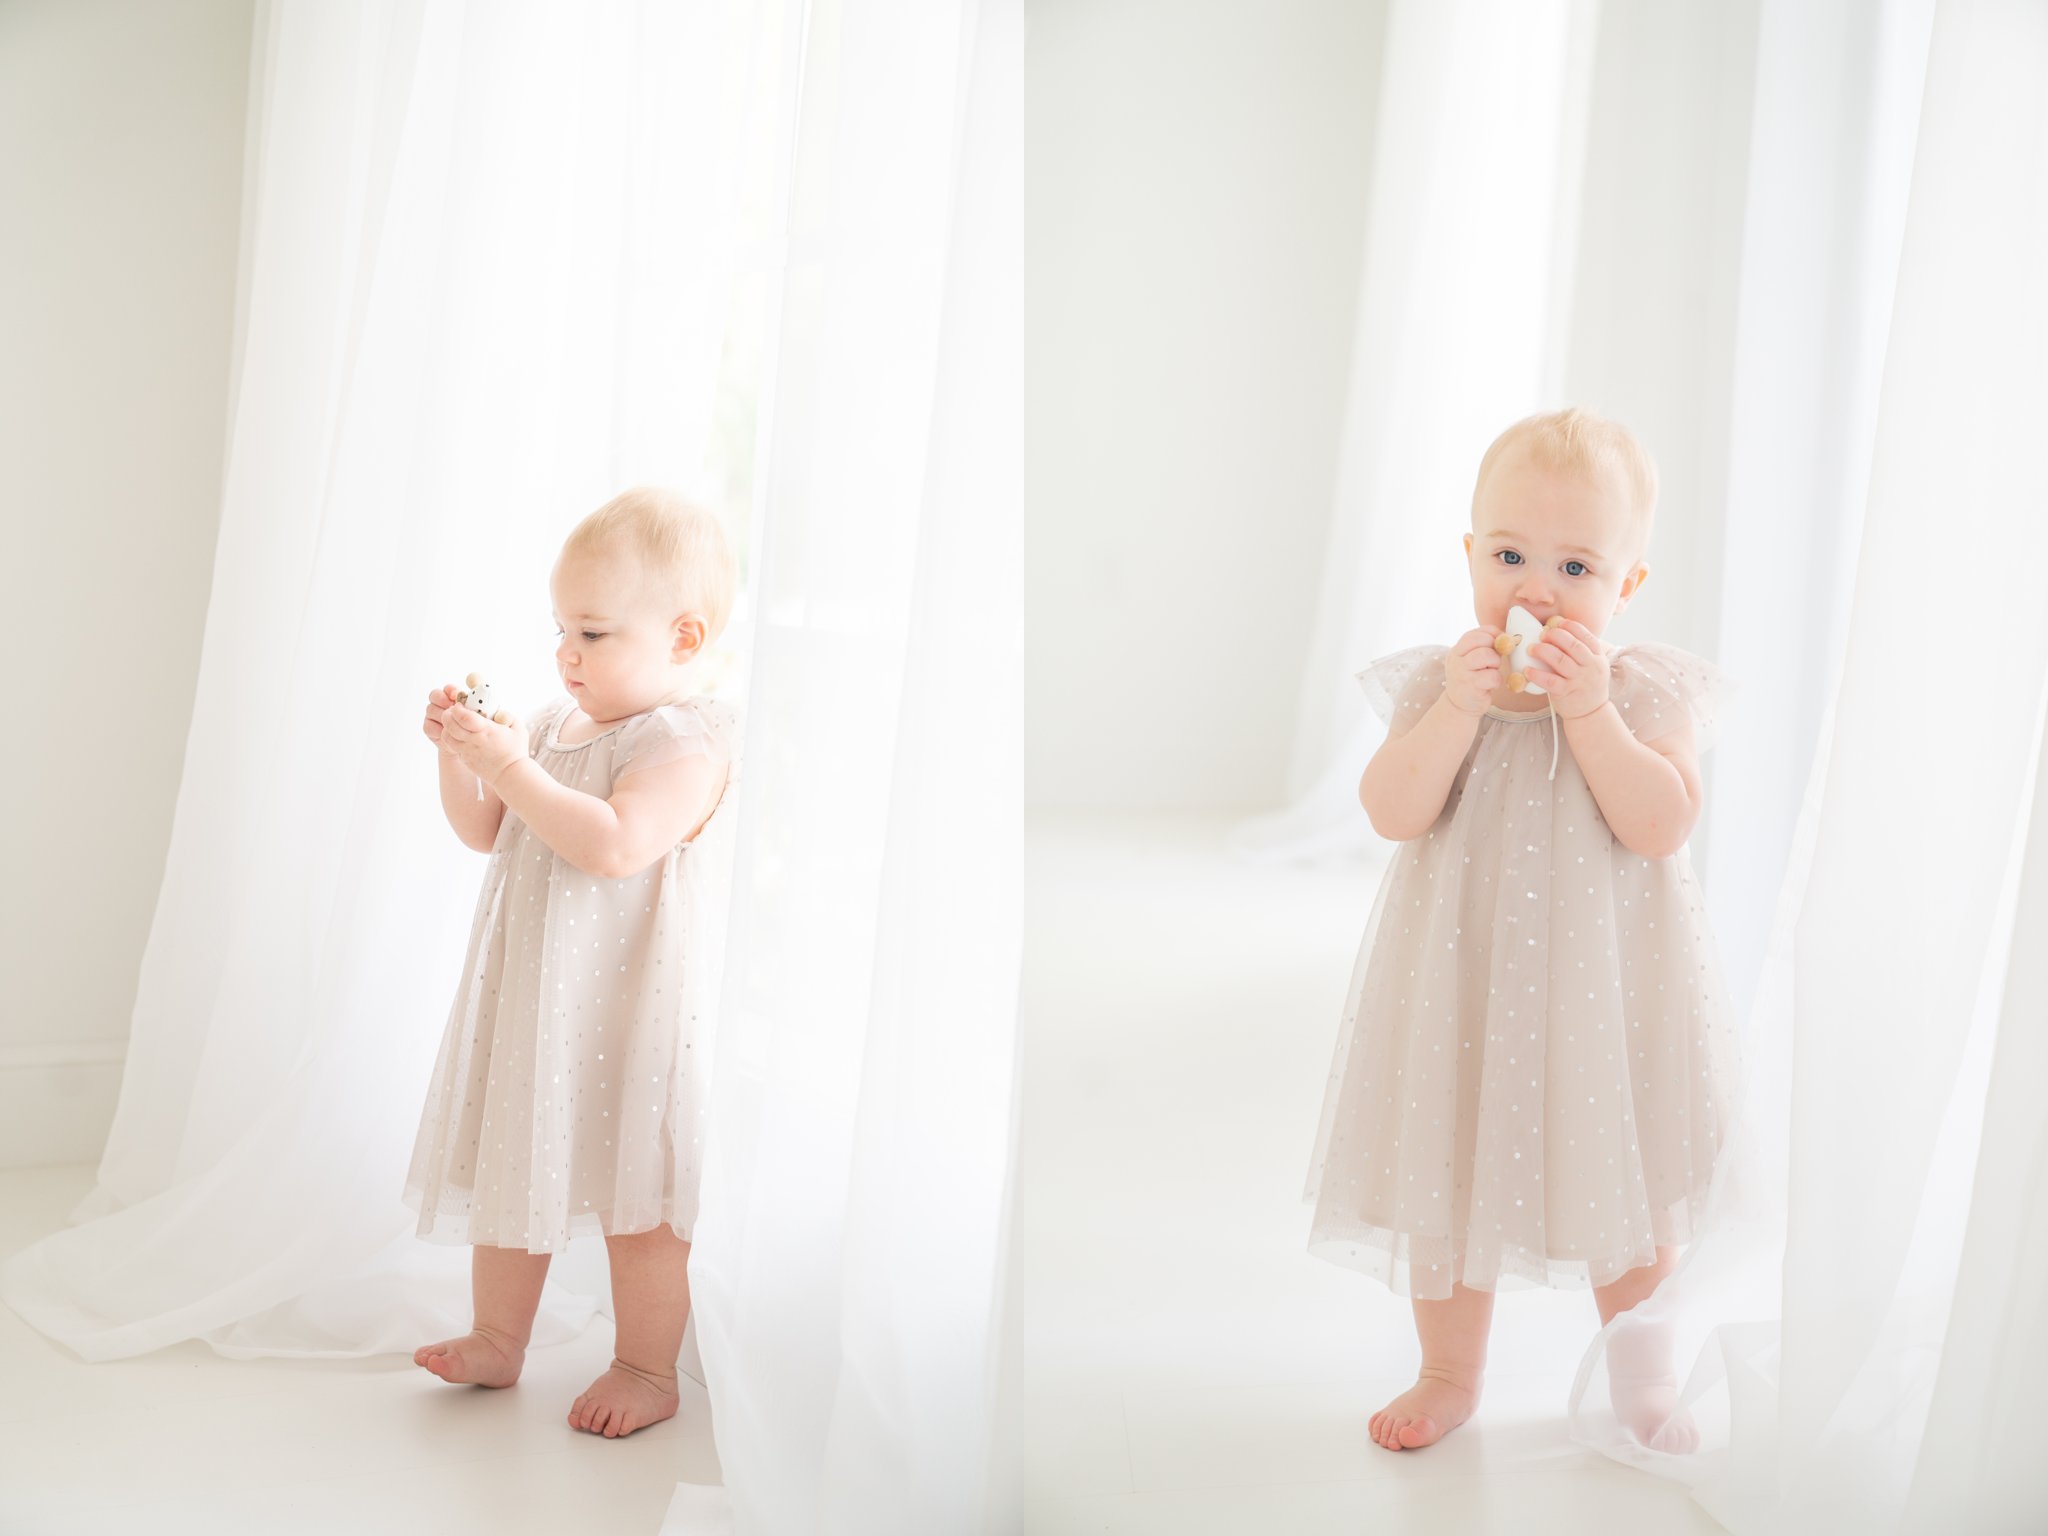 baby in a sparkly silver dress in jupiter florida photography studio